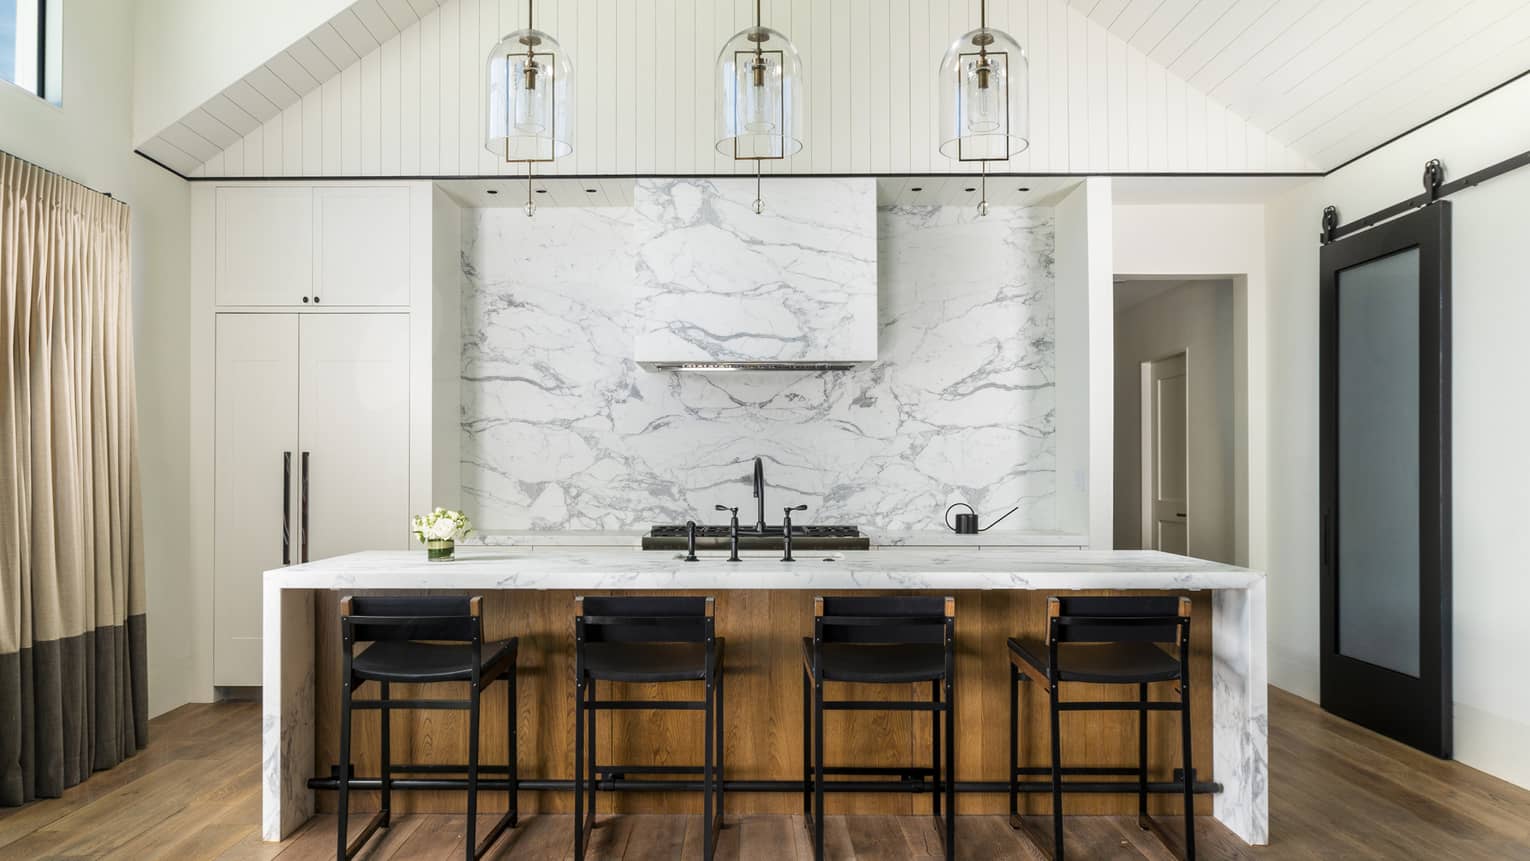 Vaulted ceiling kitchen with marble island and accent wall, four counter-height chairs and three hanging pendant lights